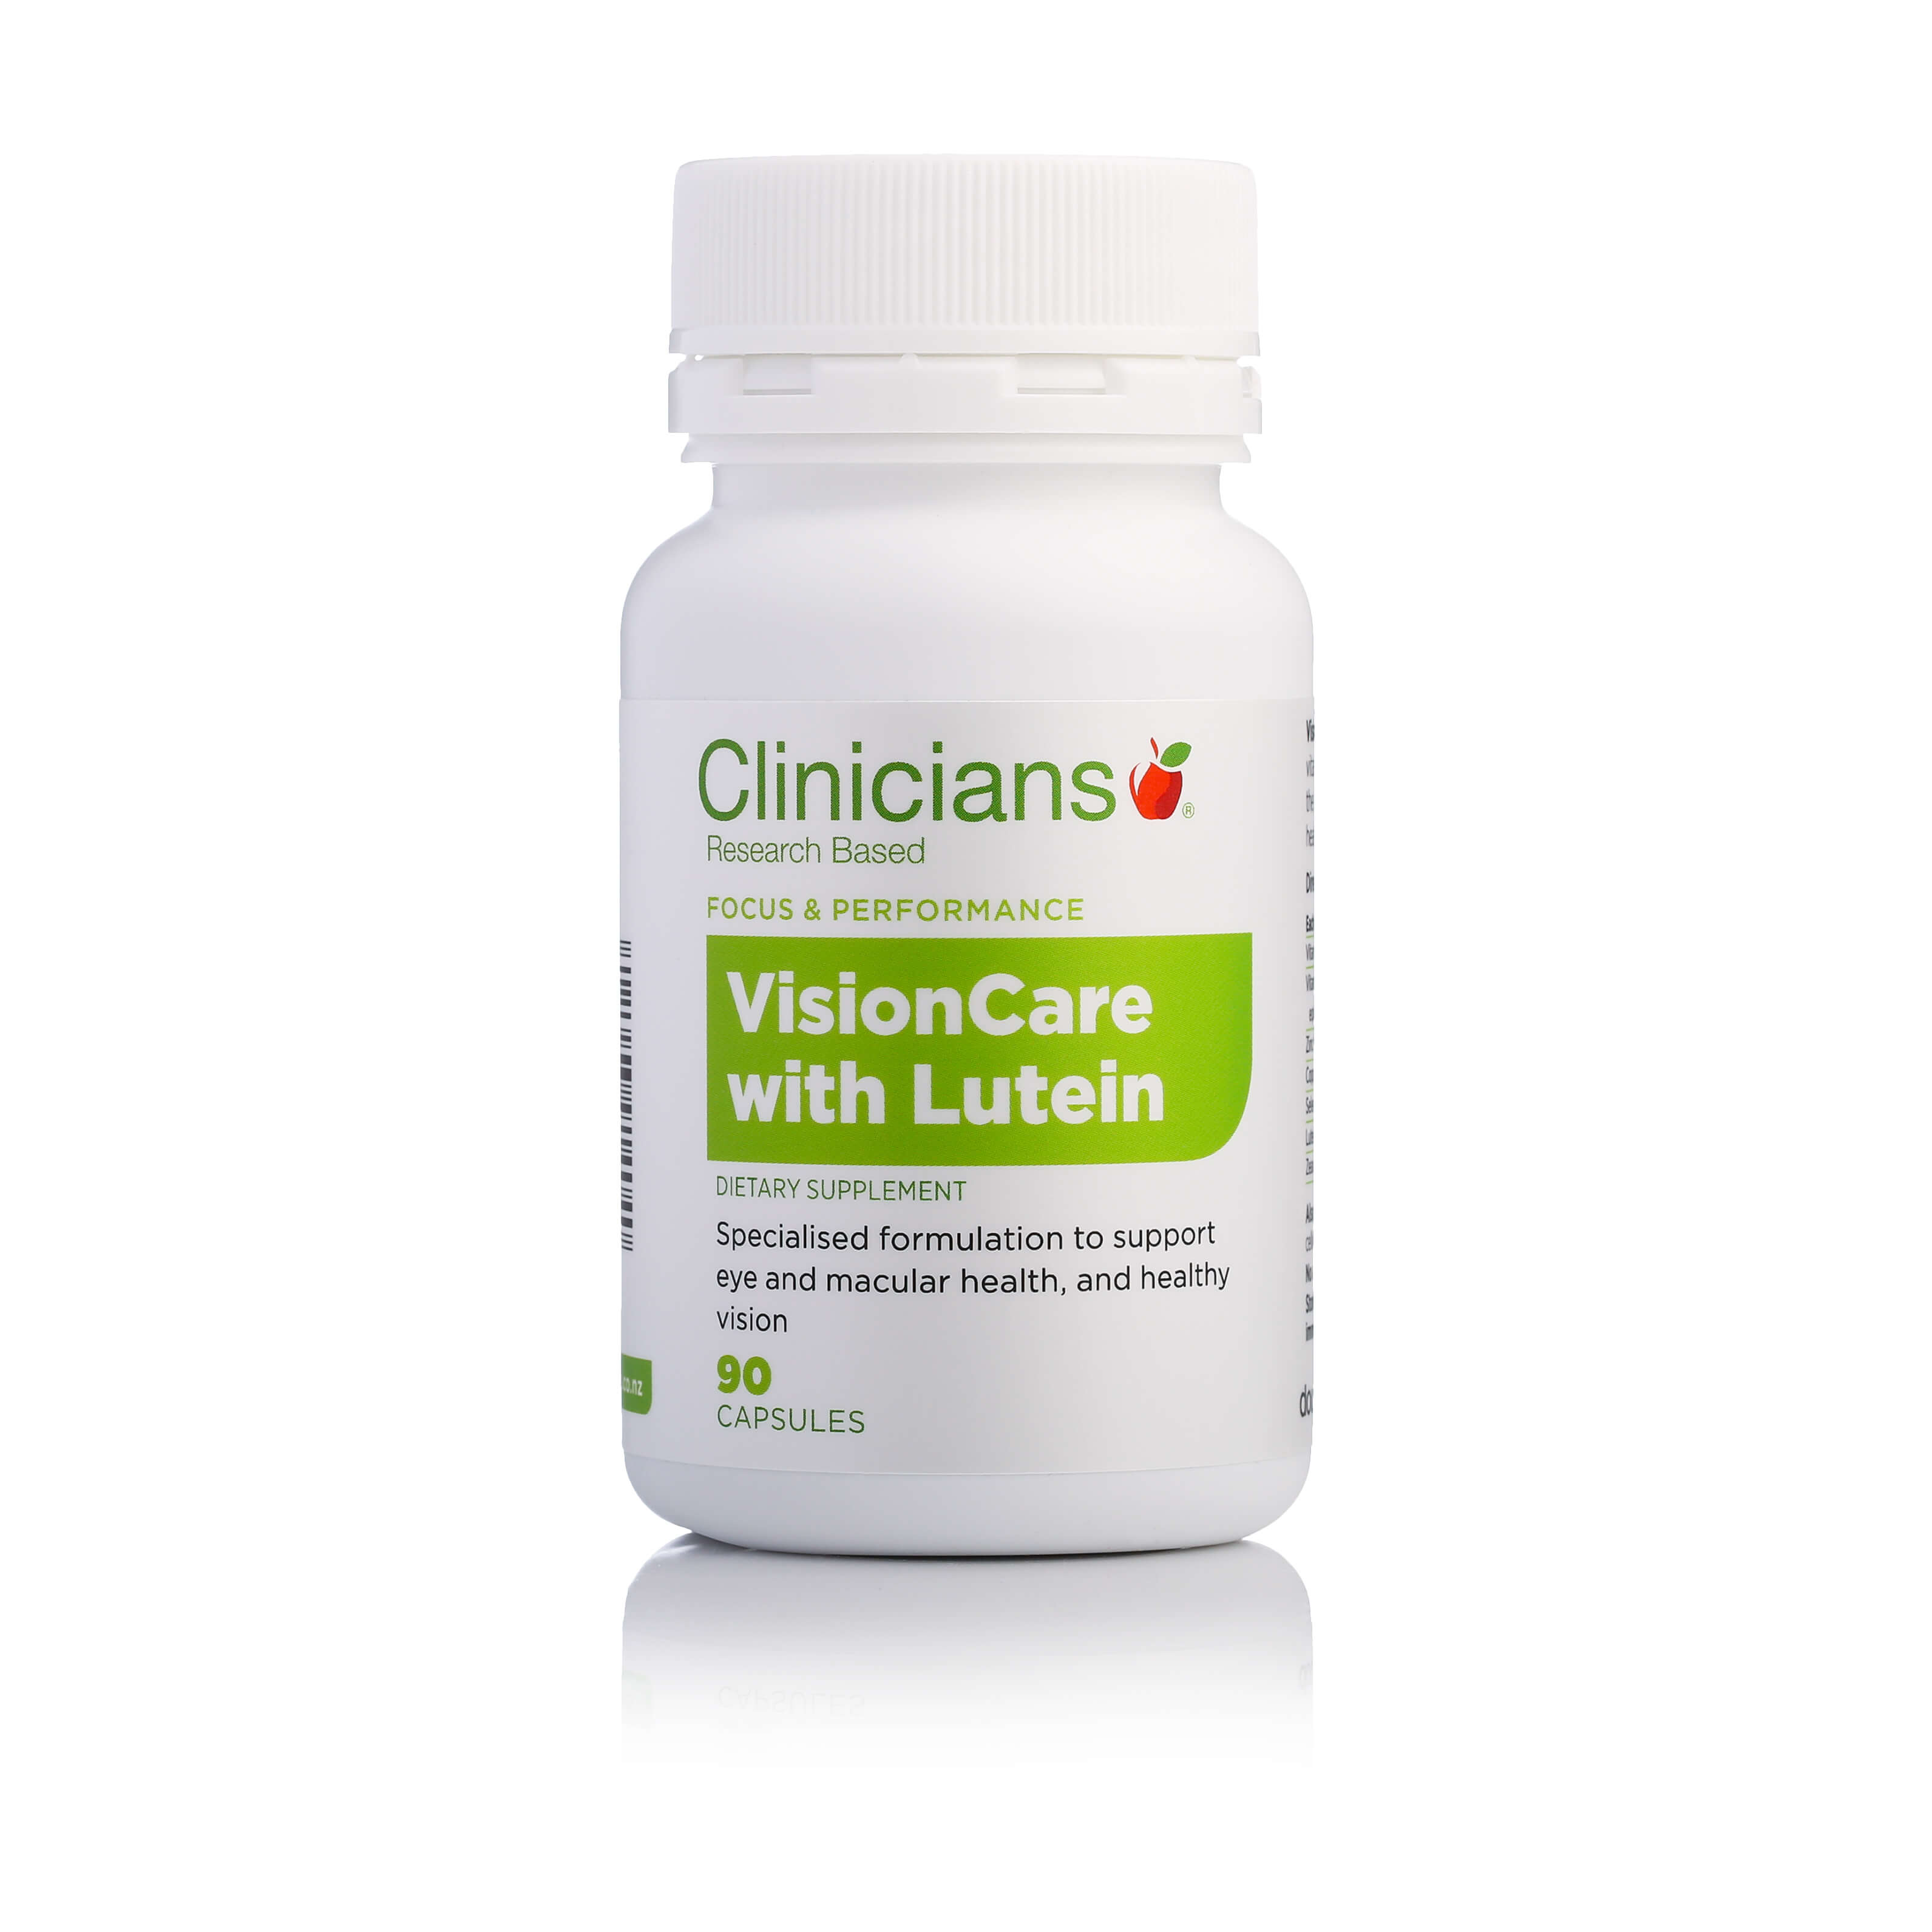 Clinicians VisionCare with Lutein 90 Capsules